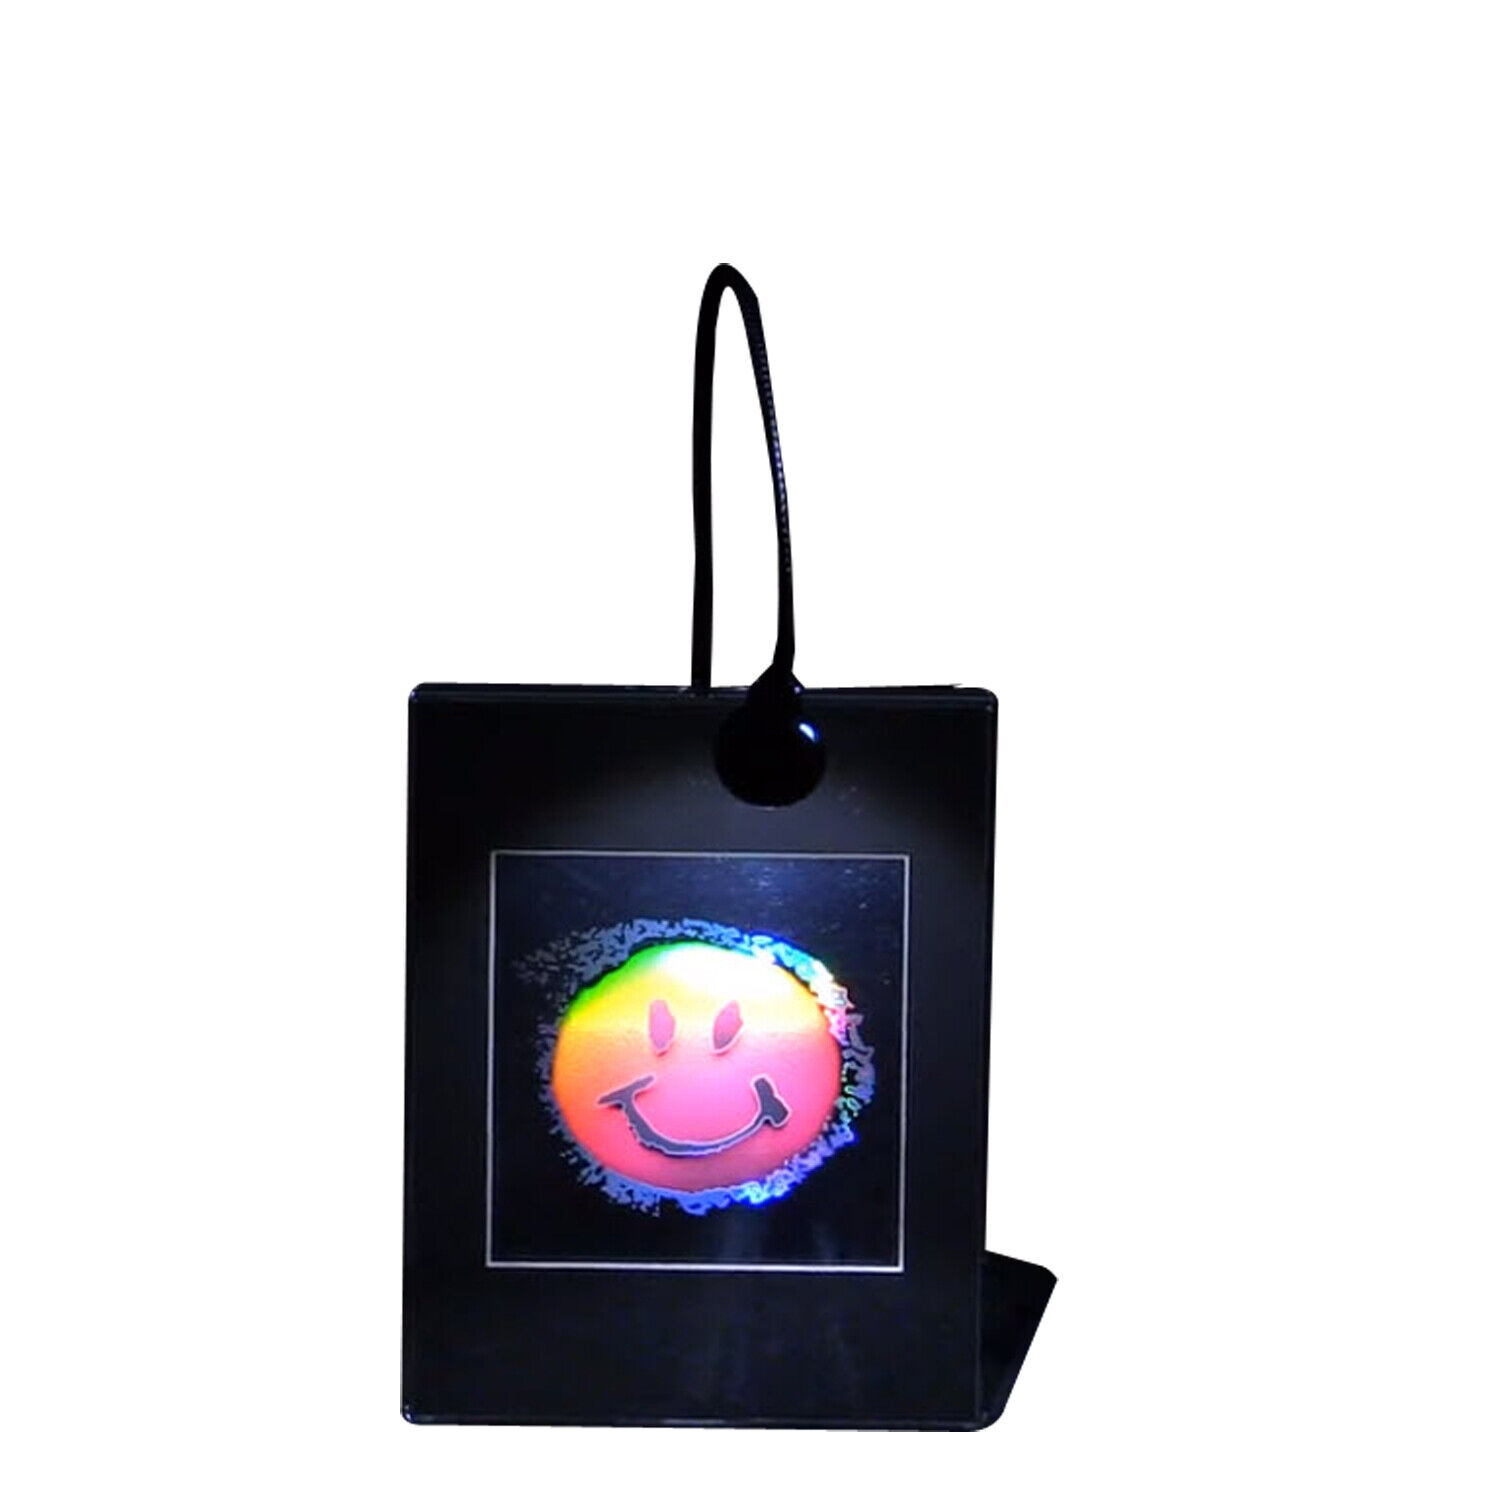 Smiley Face 2D/3D Collectible Hologram Picture - EMBOSSED - Light Desk Stand